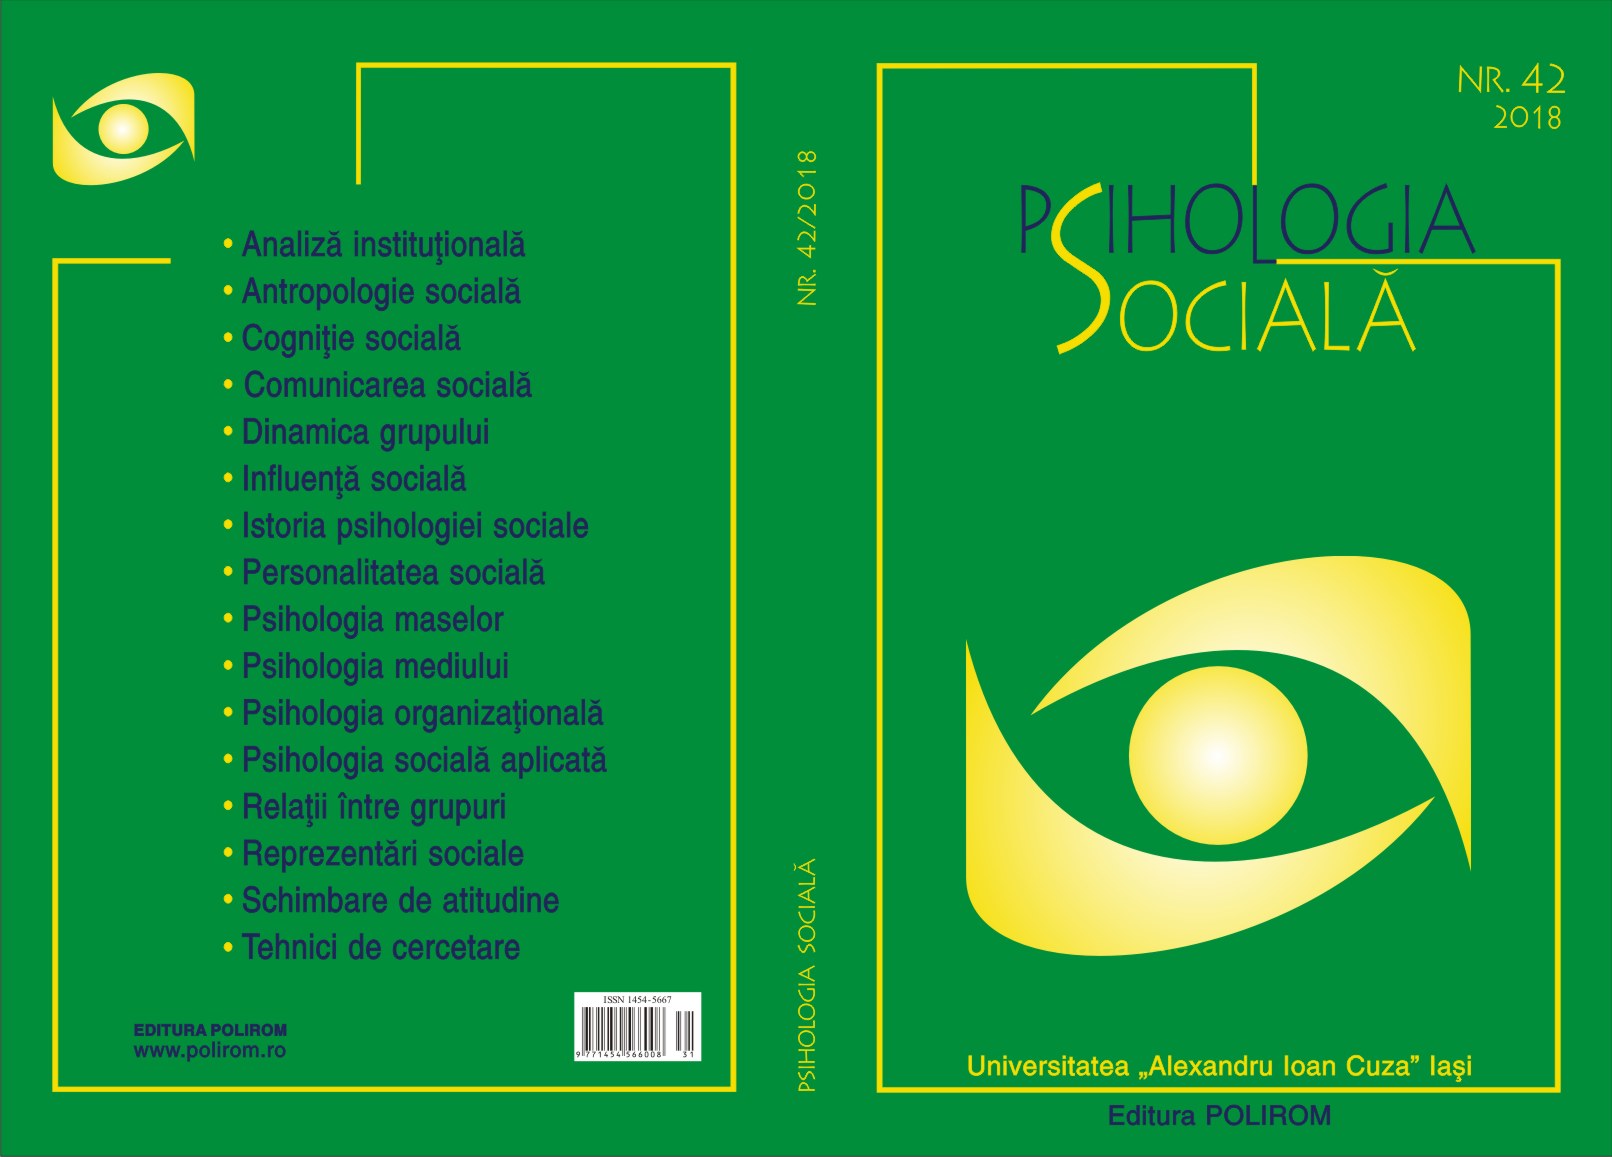 Threats to the social sciences in Brazil and solidarity Cover Image